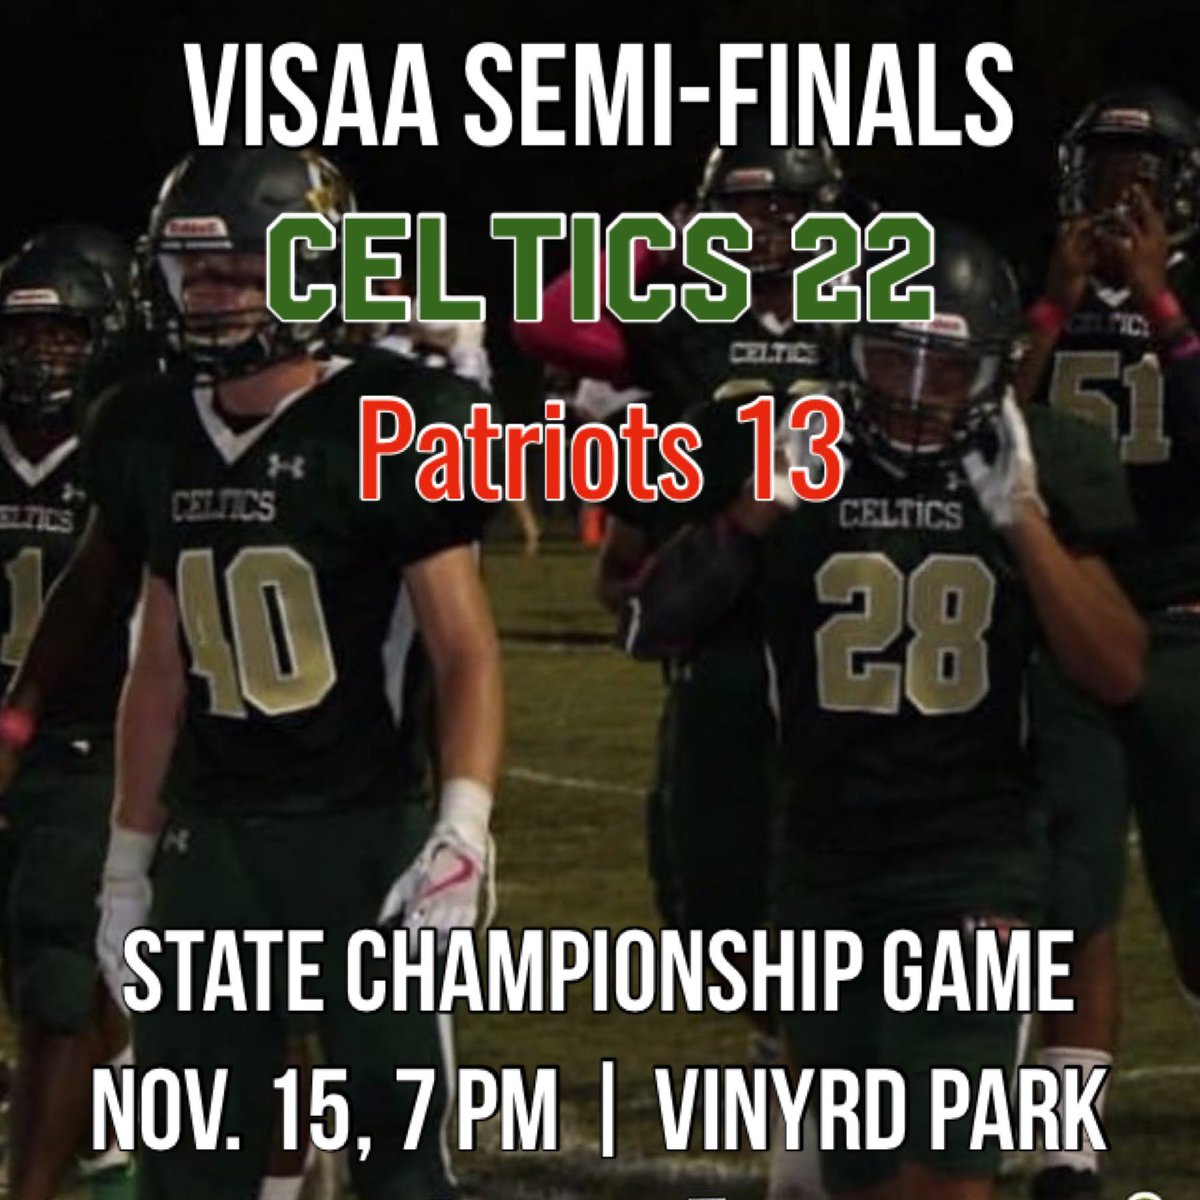 Celtics 🏈 is advancing to @GO_VISAA Div. III state championship game for 6th consecutive year after beating Portsmouth Christian 22-13 tonight. As the No. 1 seed, Roanoke Catholic will host the championship game next Friday, Nov. 15 at 7 pm at Vinyard Park. Go Celtics!